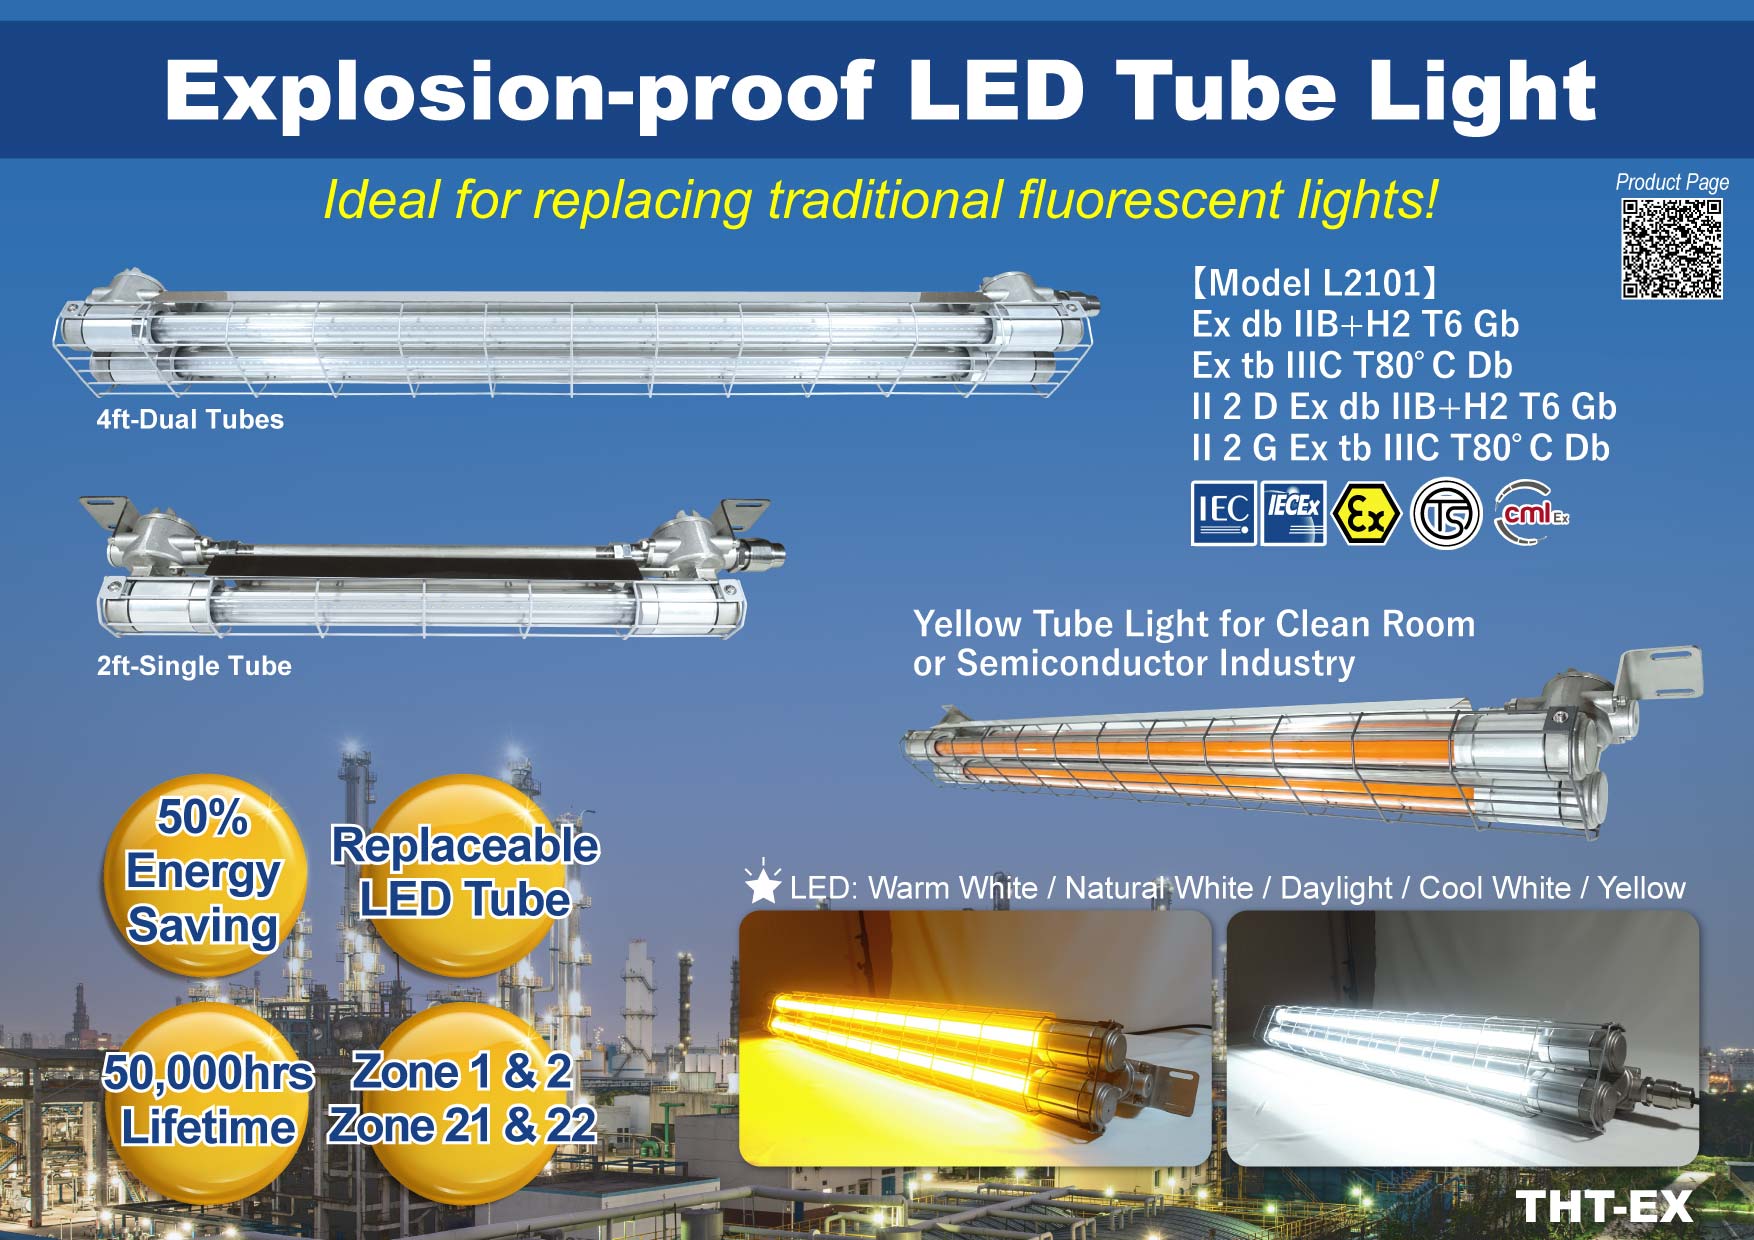 New Product Released! Explosion-proof LED Tube Light - Model L2101